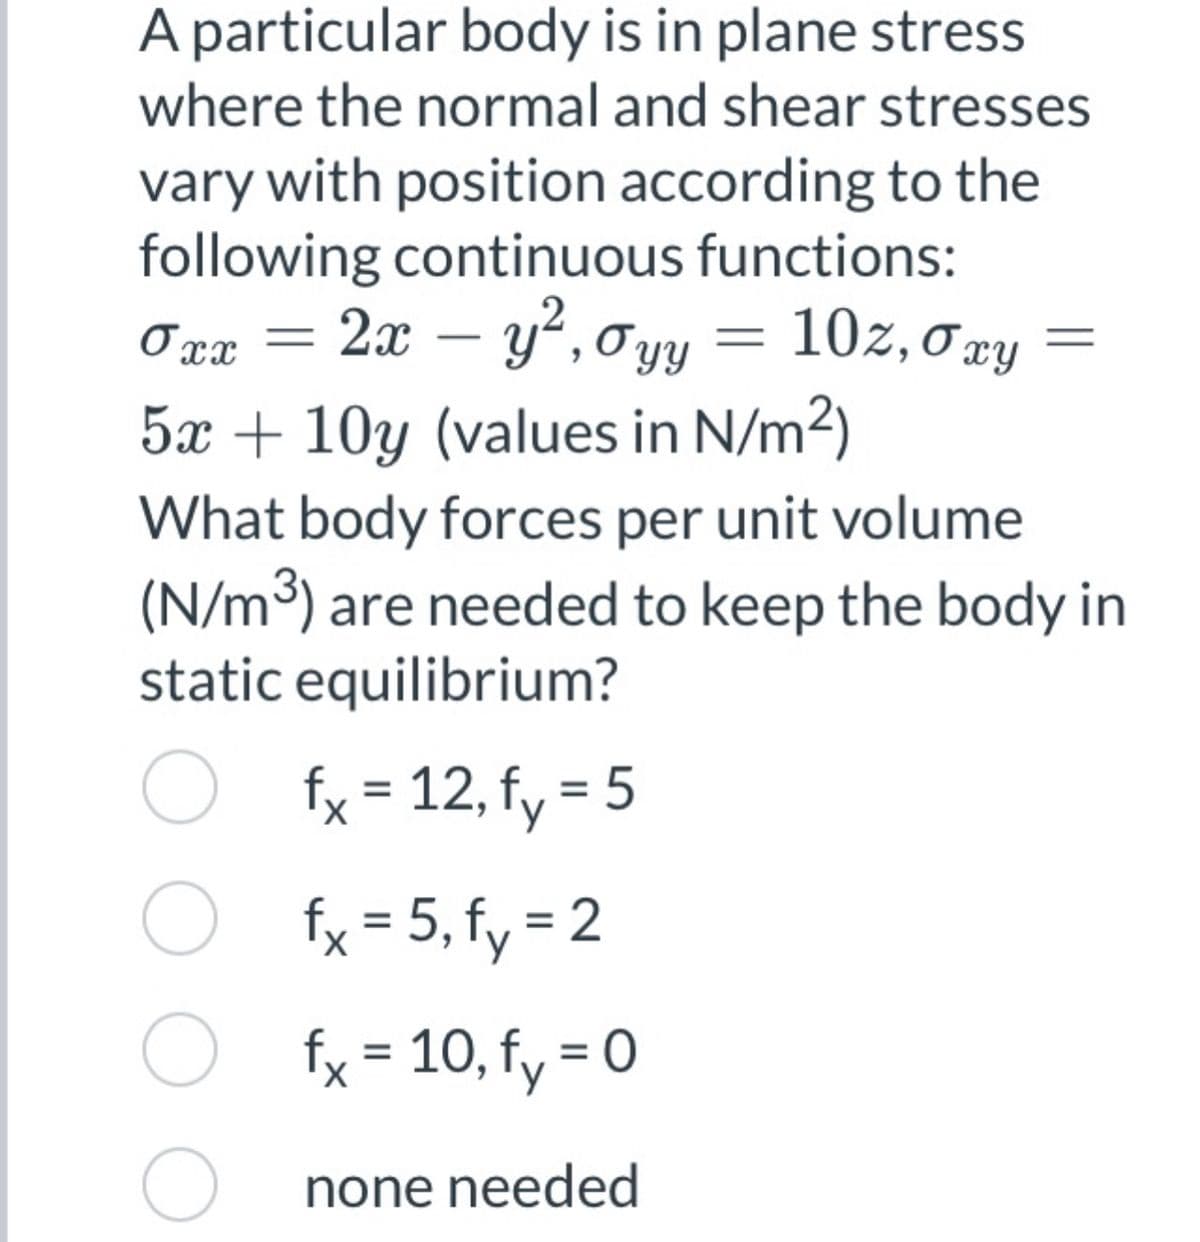 A particular body is in plane stress
where the normal and shear stresses
vary with position according to the
following continuous functions:
2x – y², 0yy = 10z,0xy
5x + 10y (values in N/m2)
Oxx
What body forces per unit volume
(N/m³) are needed to keep the body in
static equilibrium?
O fx = 12, fy = 5
%D
fx = 5, fy = 2
O fx = 10, fy = 0
O none needed
